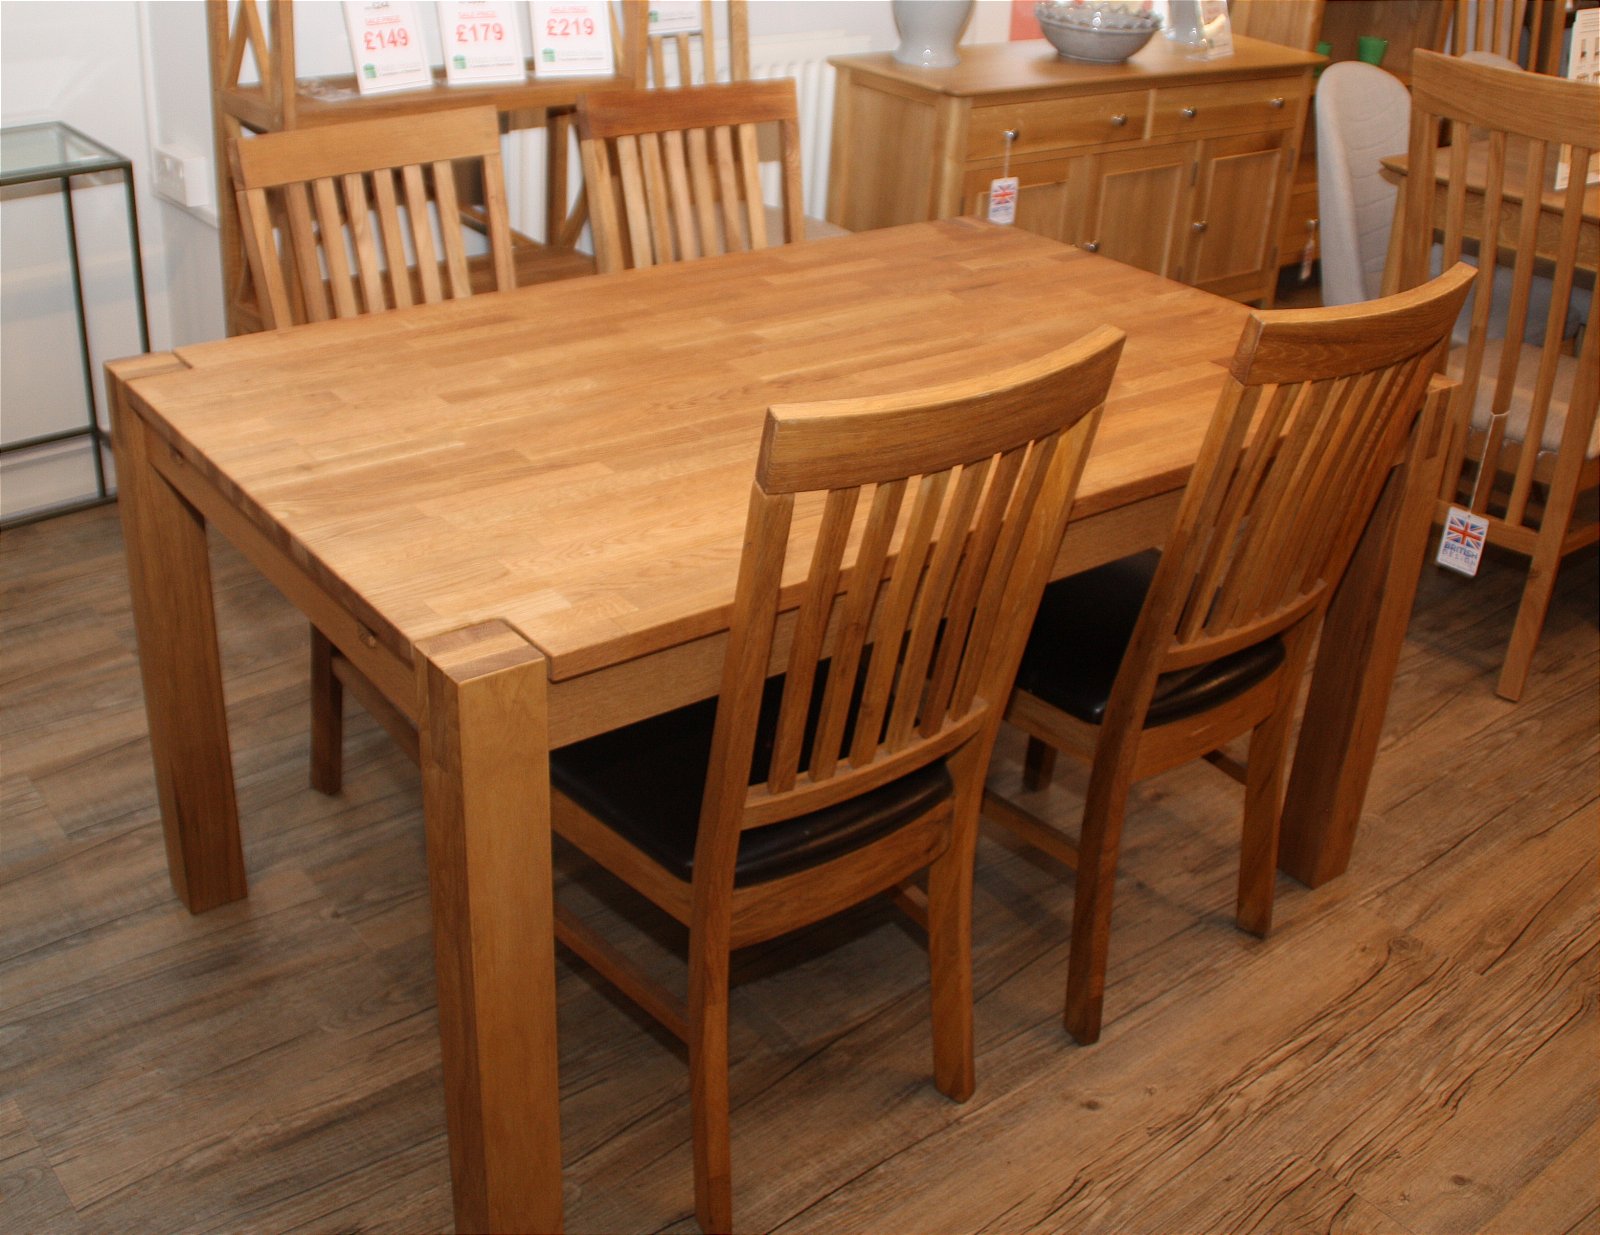 Oak Dining Room Table And Chairs For Sale